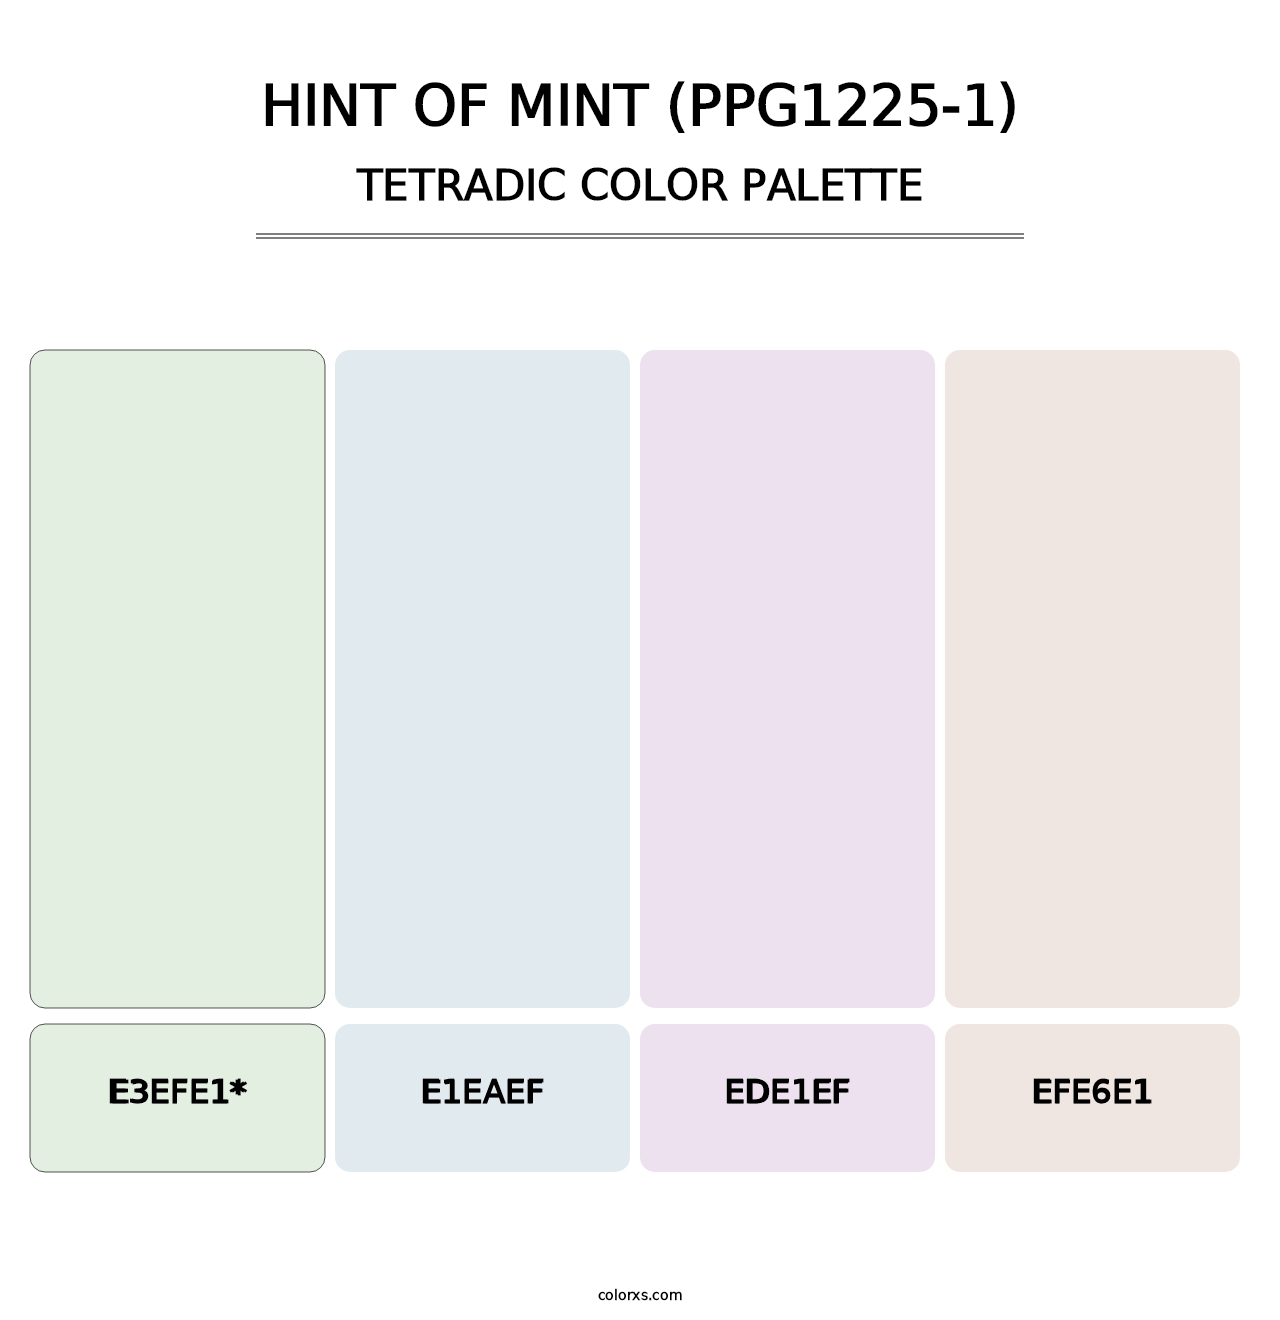 Hint Of Mint (PPG1225-1) - Tetradic Color Palette